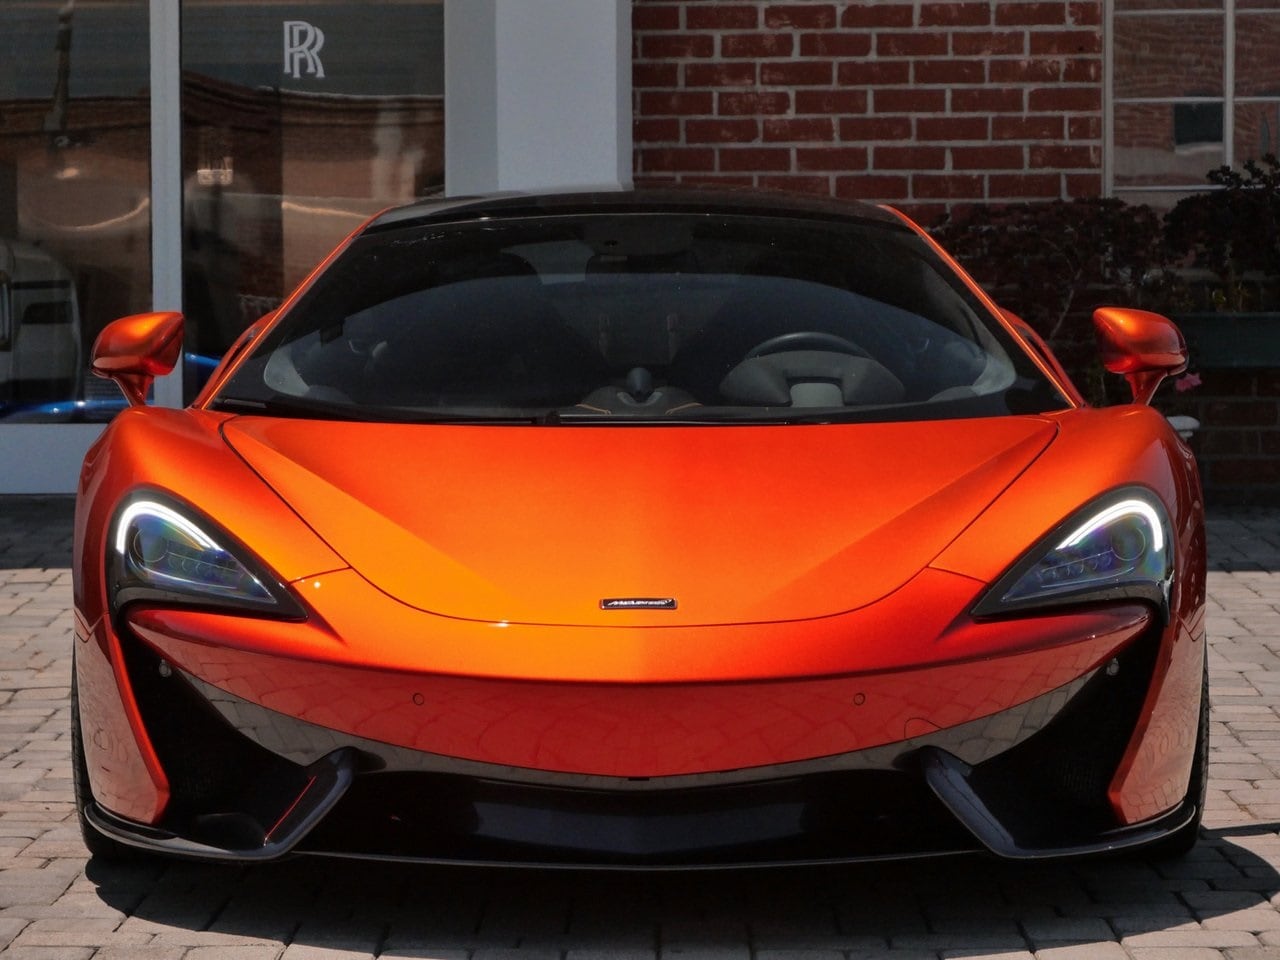 Used 2017 McLaren 570GT Base with VIN SBM13GAAXHW002575 for sale in Beverly Hills, CA